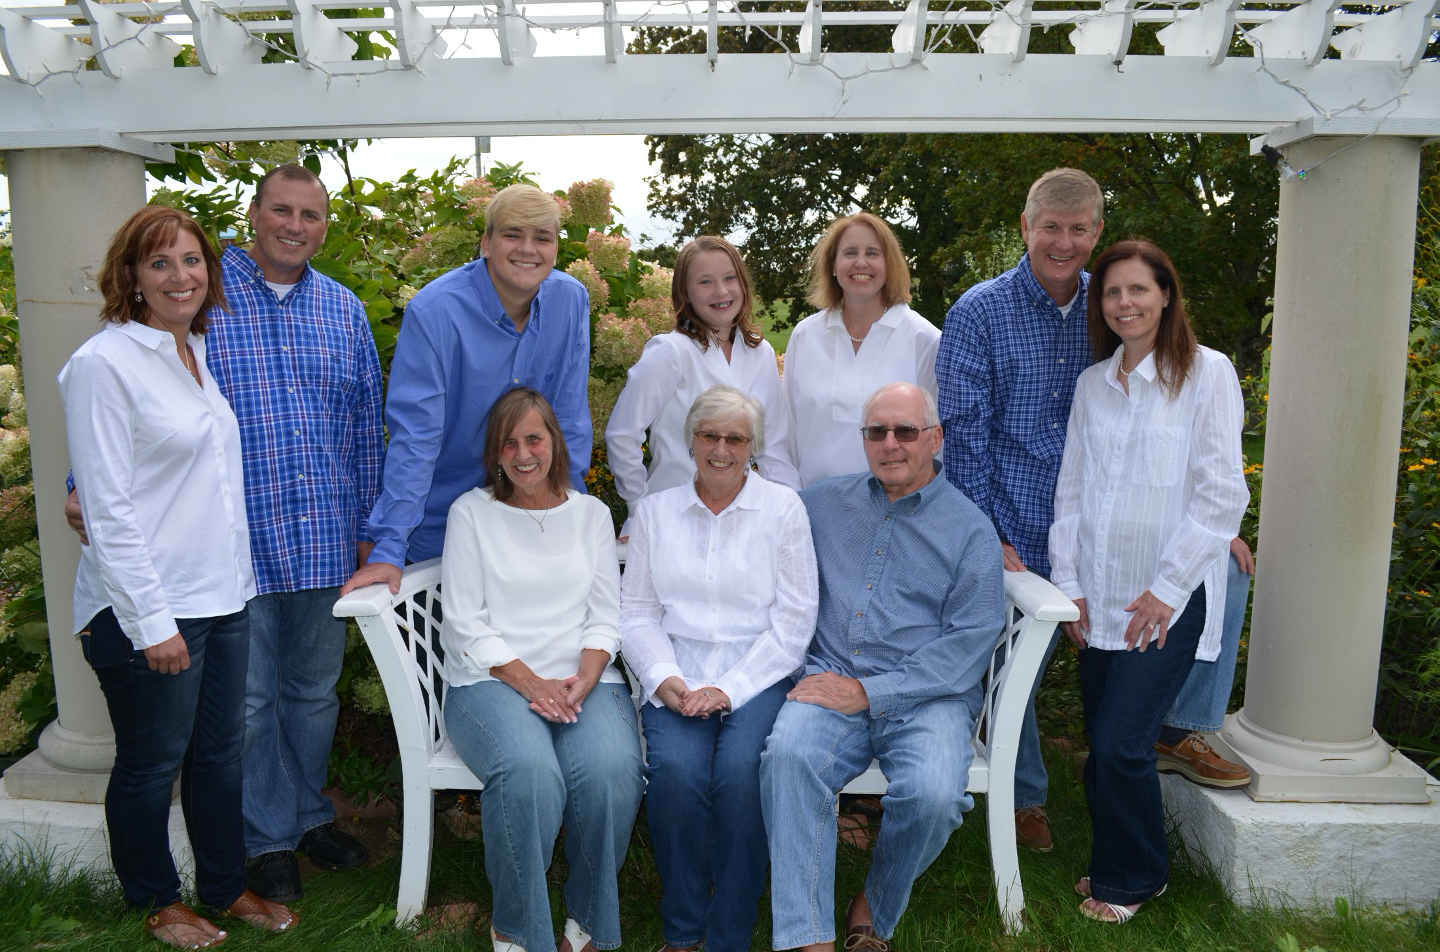 Family Group of of ten outdoors posing for portrait, all wearing blue and white.